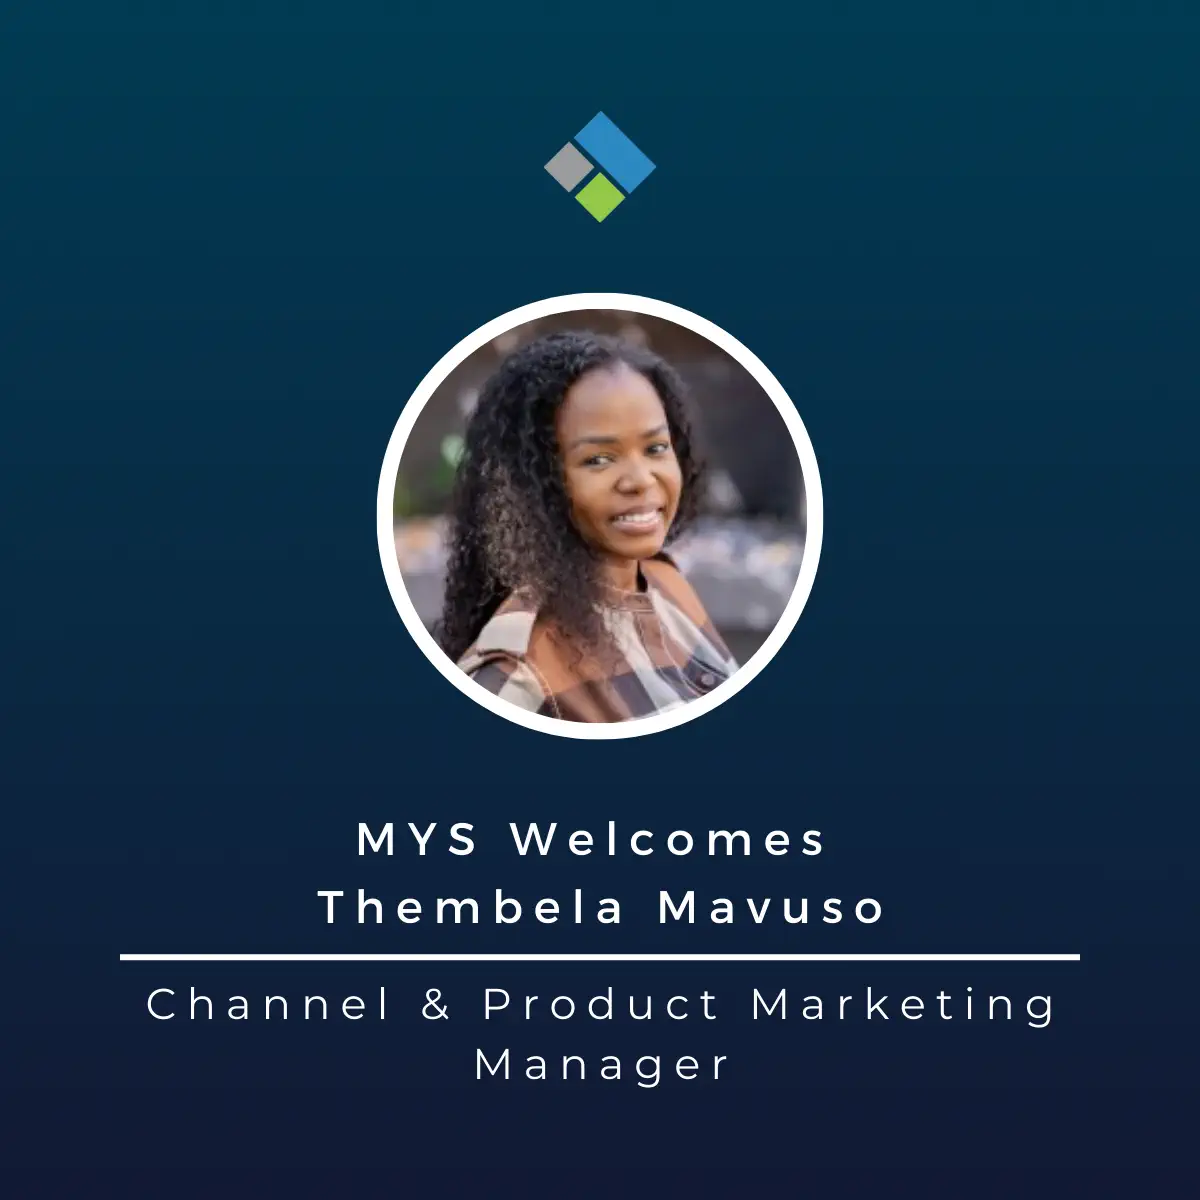 MYS Welcomes Thembela Mavuso, Channel & Product Marketing Manager